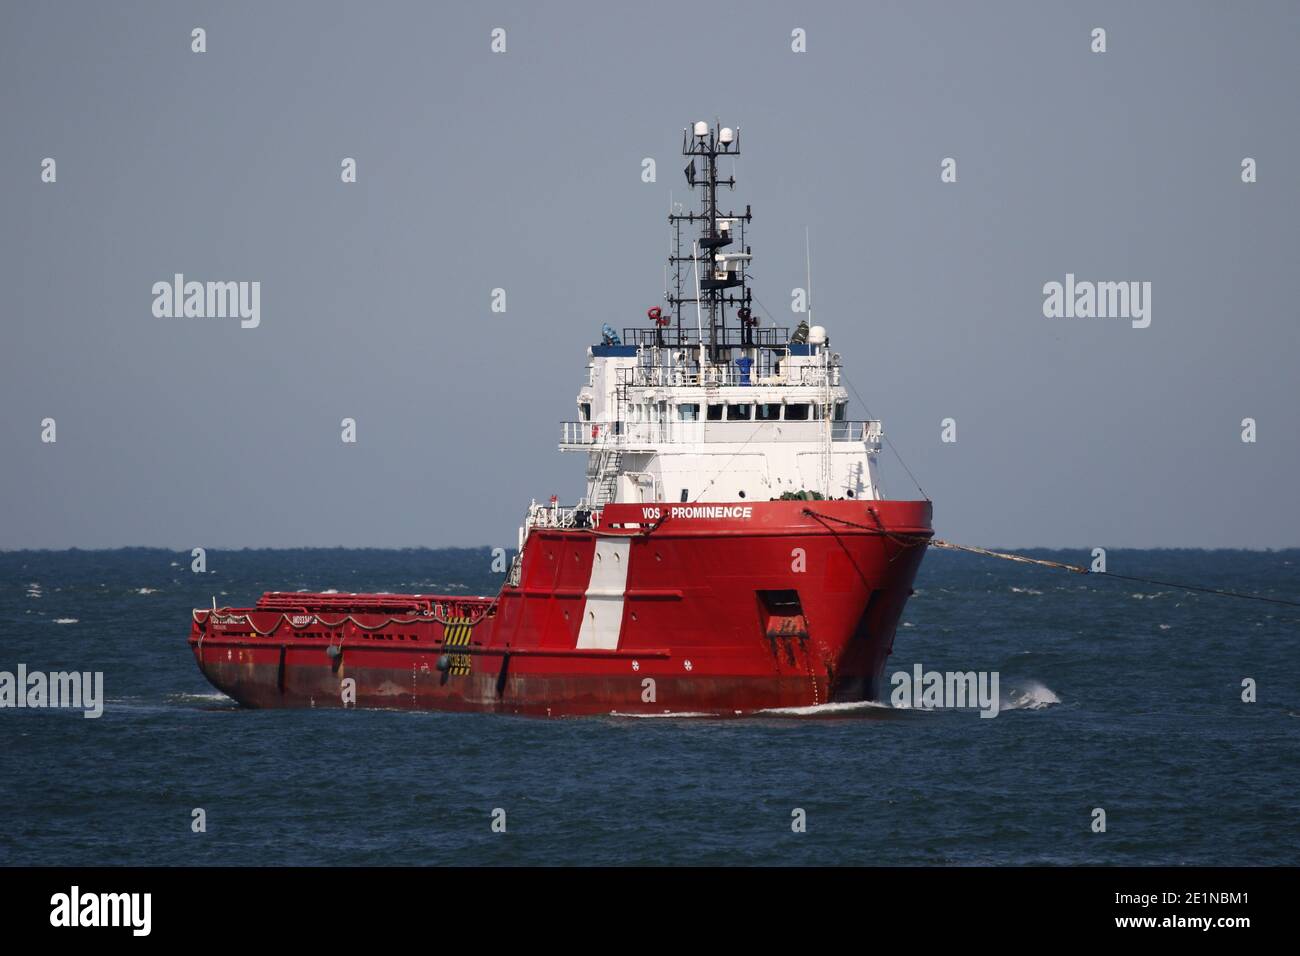 The offshore supplier VOS Prominence on September 18, 2020 on its last trip to the scraper. Stock Photo